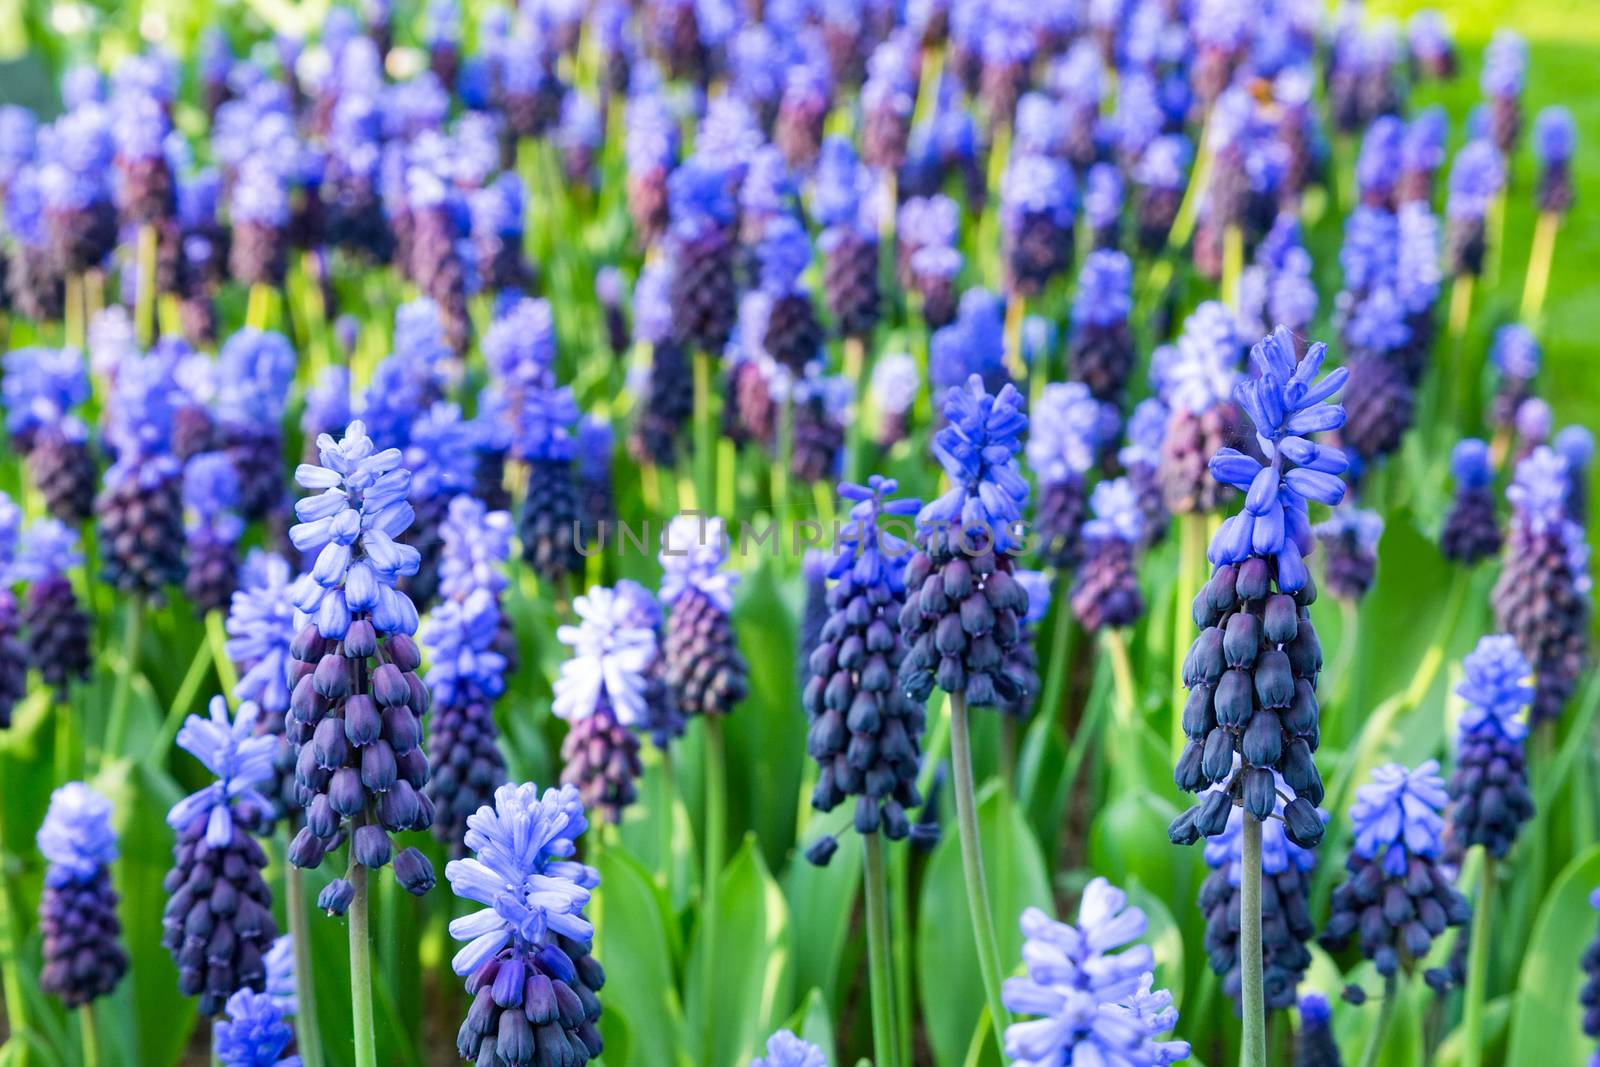 Many blue grape hyacinths by BenSchonewille